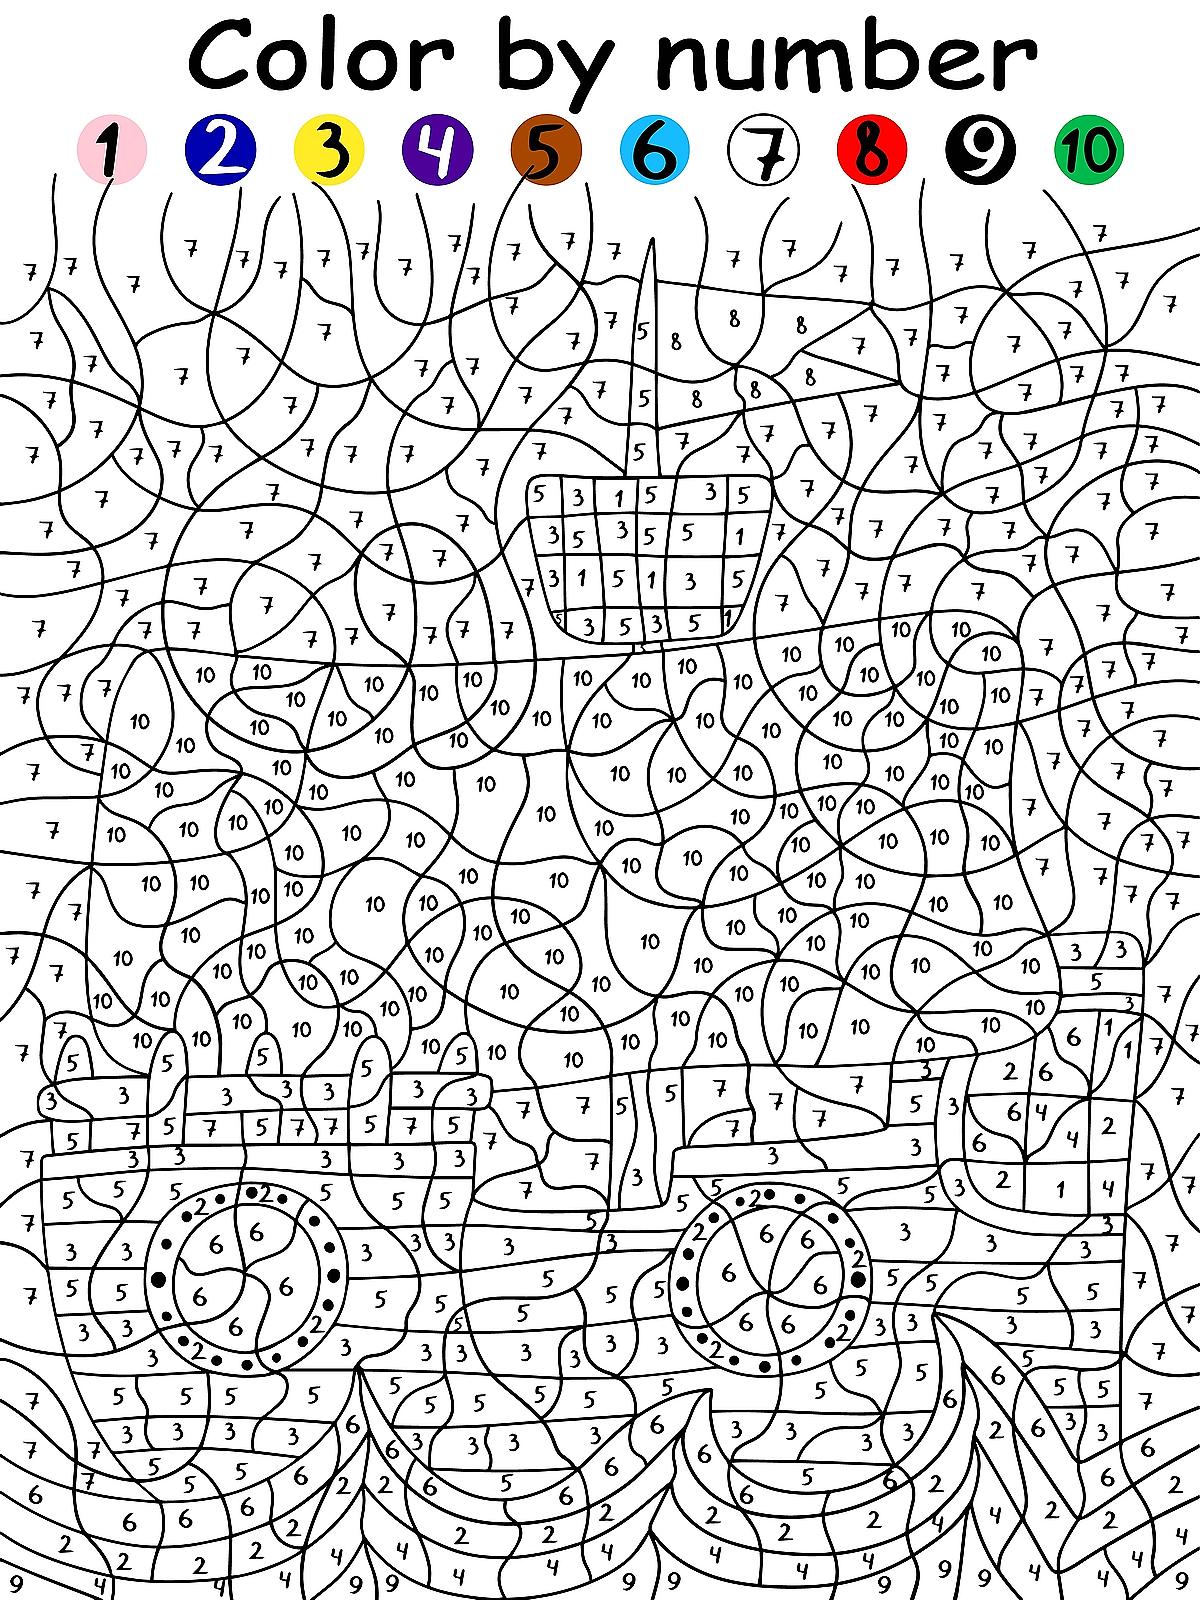 Color by numbers activity pages for kids free fun coloring pages that are by the number printables mom